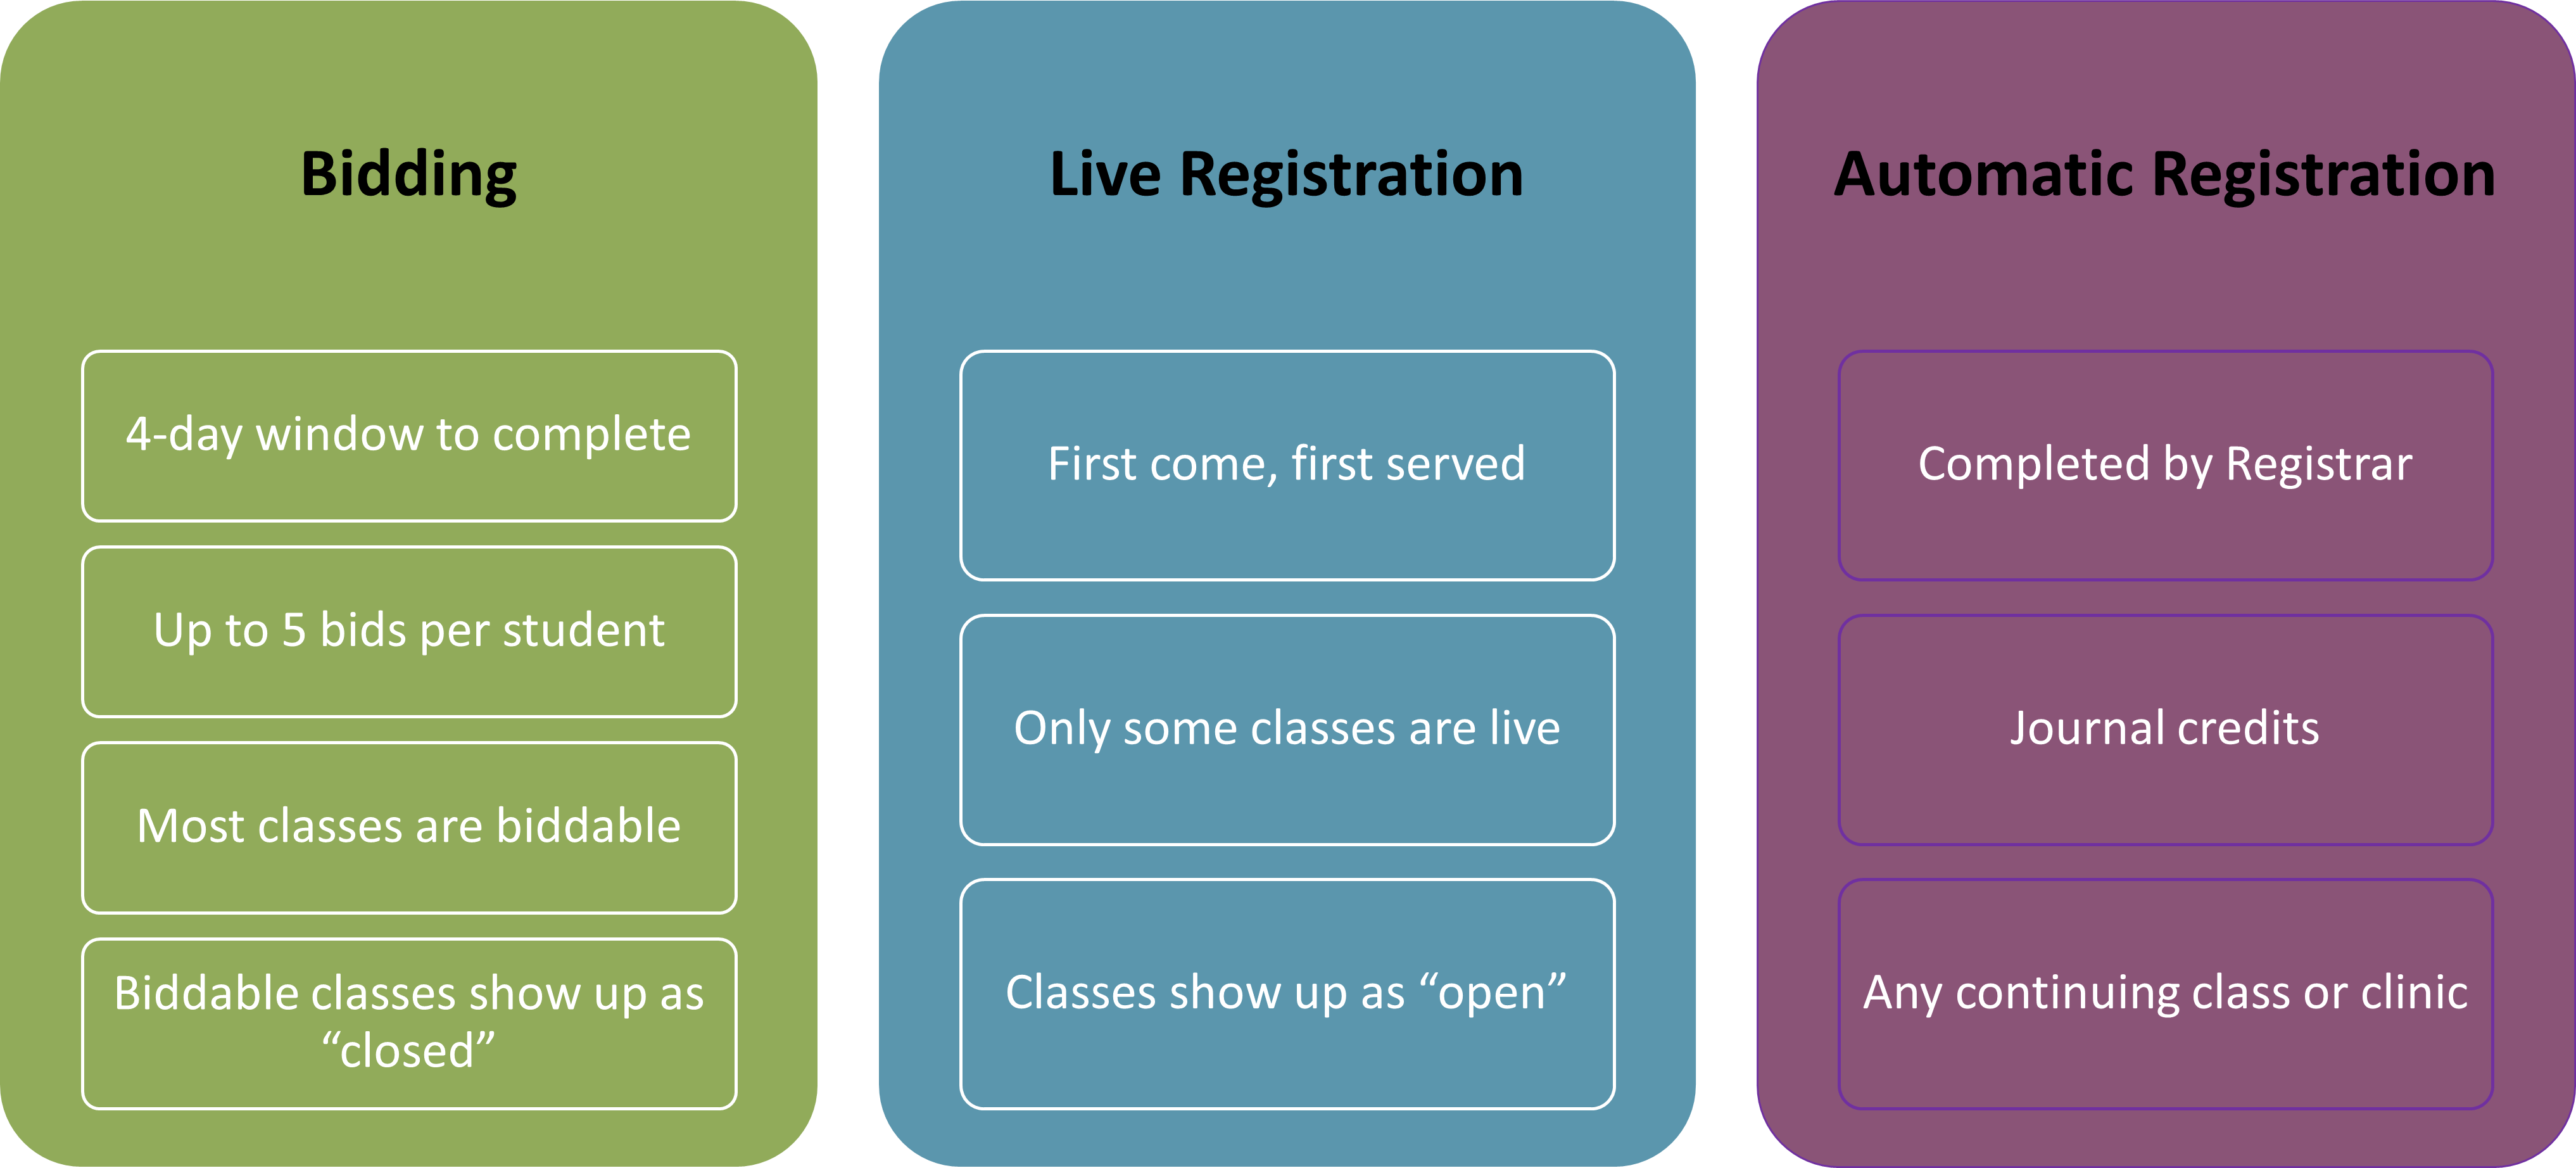 Graphic with three columns showing the three components of Registration which are Bidding, Live Registration, and Automatic Registration